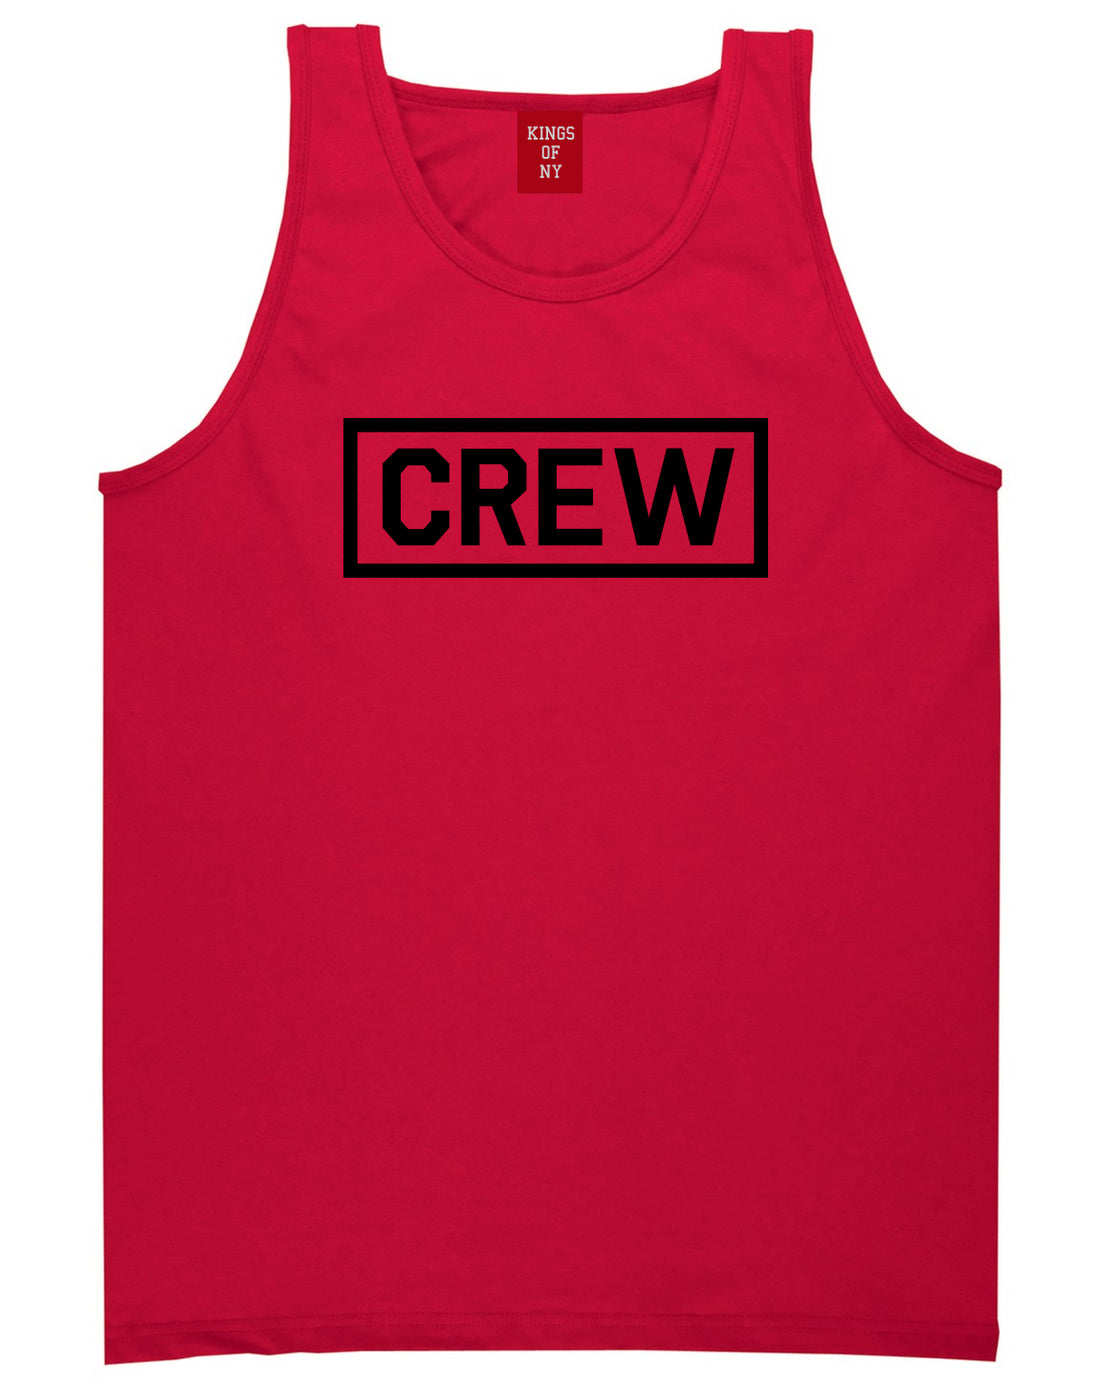 Crew Box Film Movie Mens Red Tank Top Shirt by KINGS OF NY